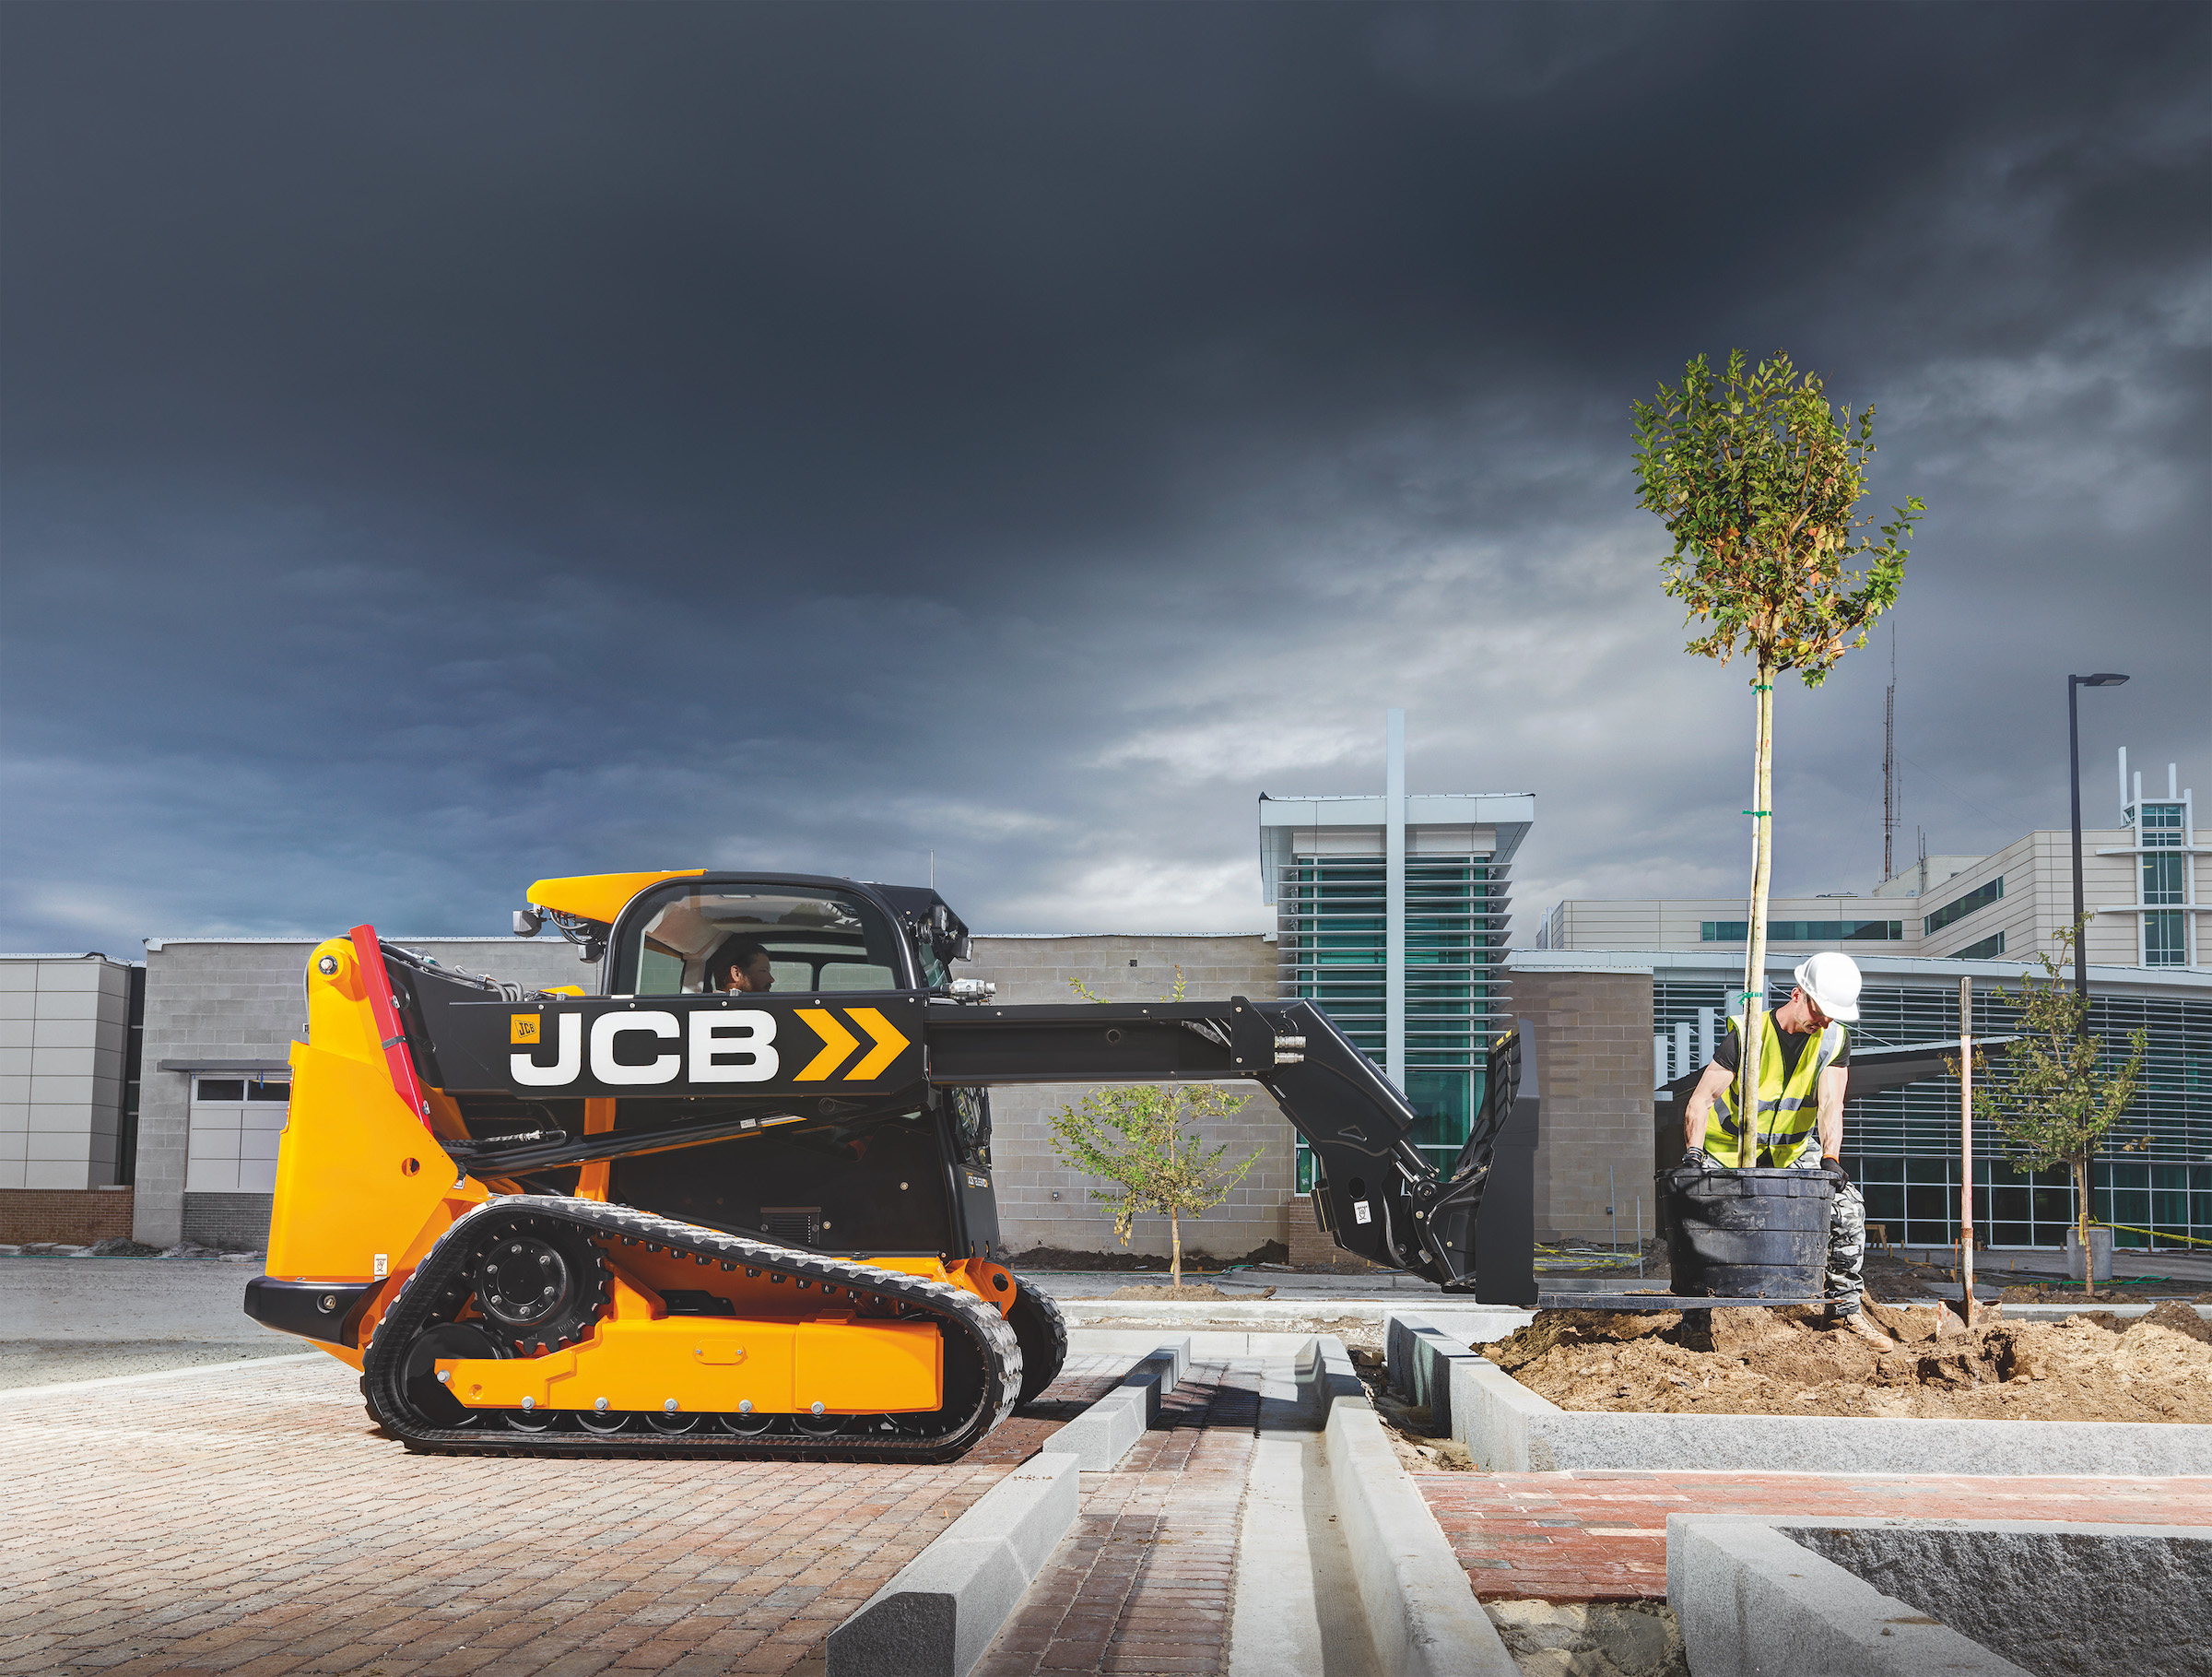 The JCB Teleskid is the world’s only skid steer and compact track loader with a telescopic boom, allowing operators to lift higher, reach further and dig deeper than ever before.